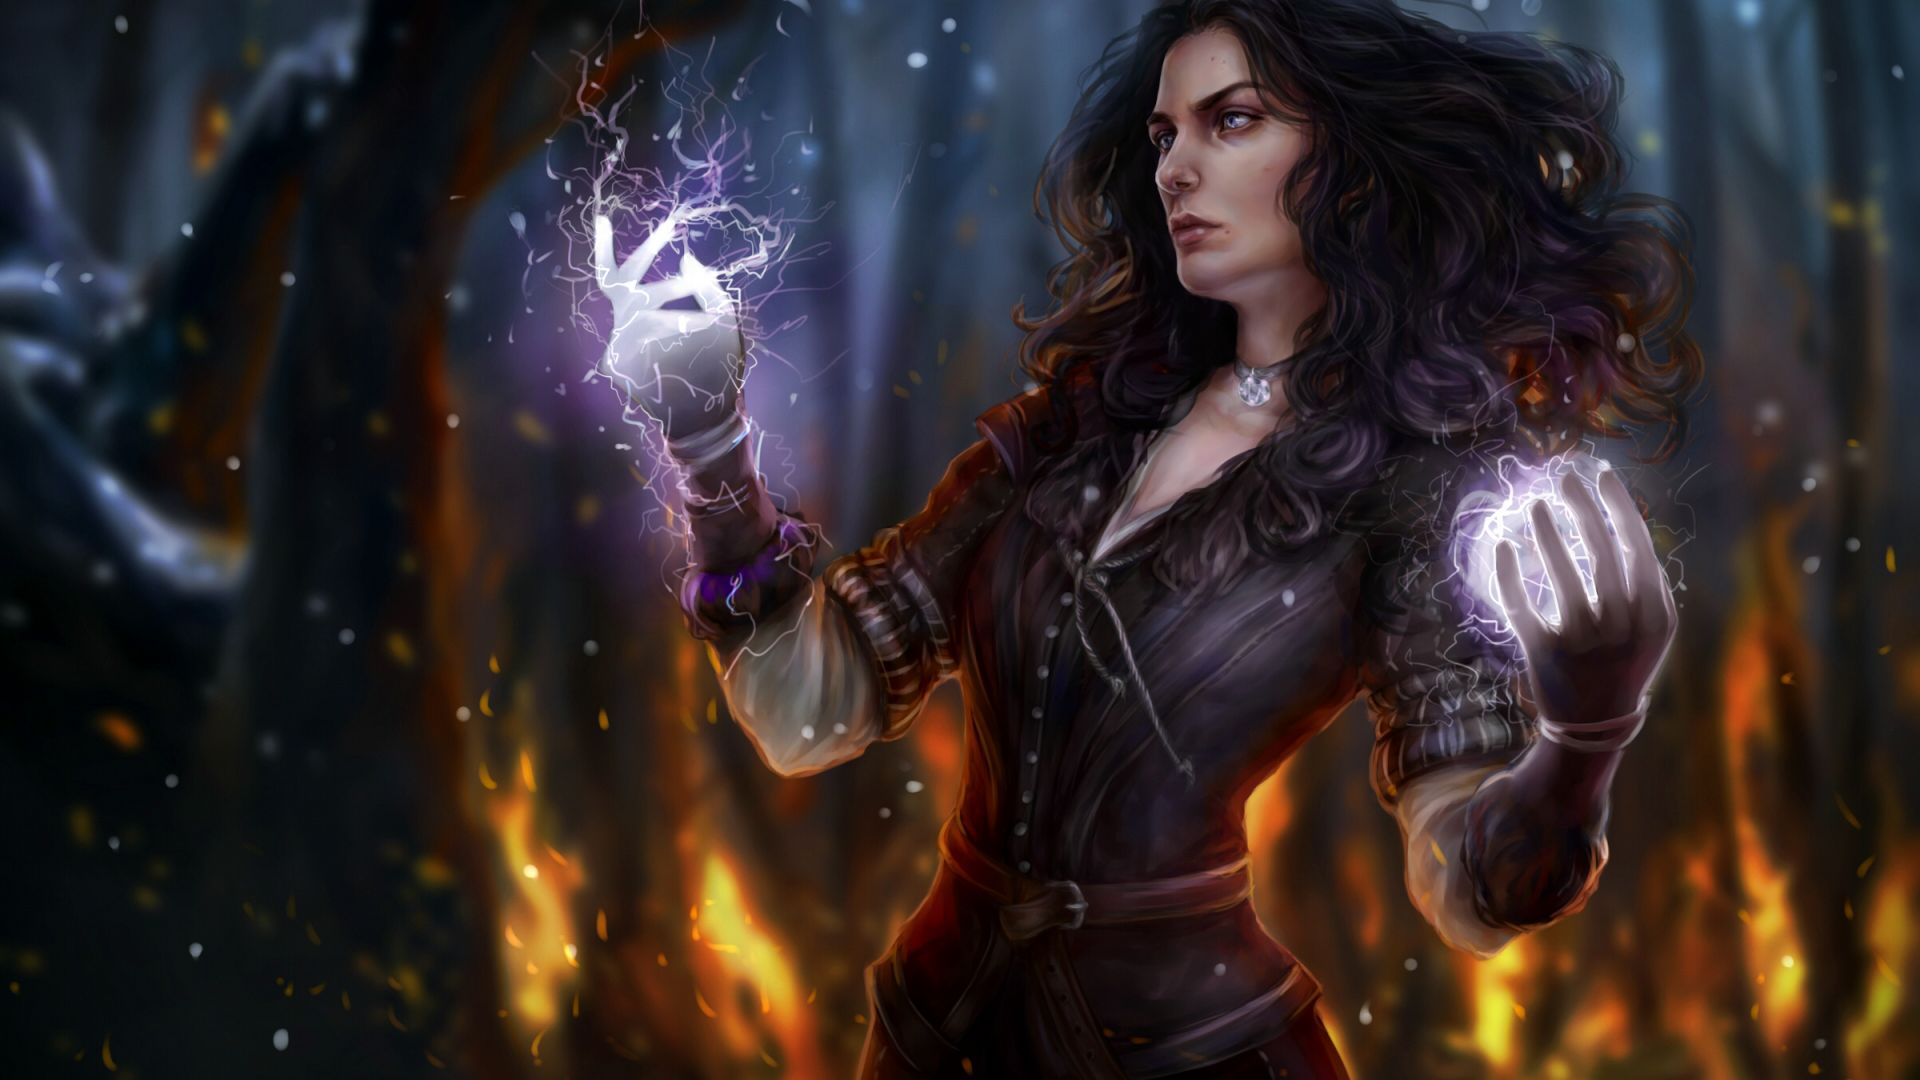 Wallpaper Yennefer, video game, the witcher, art